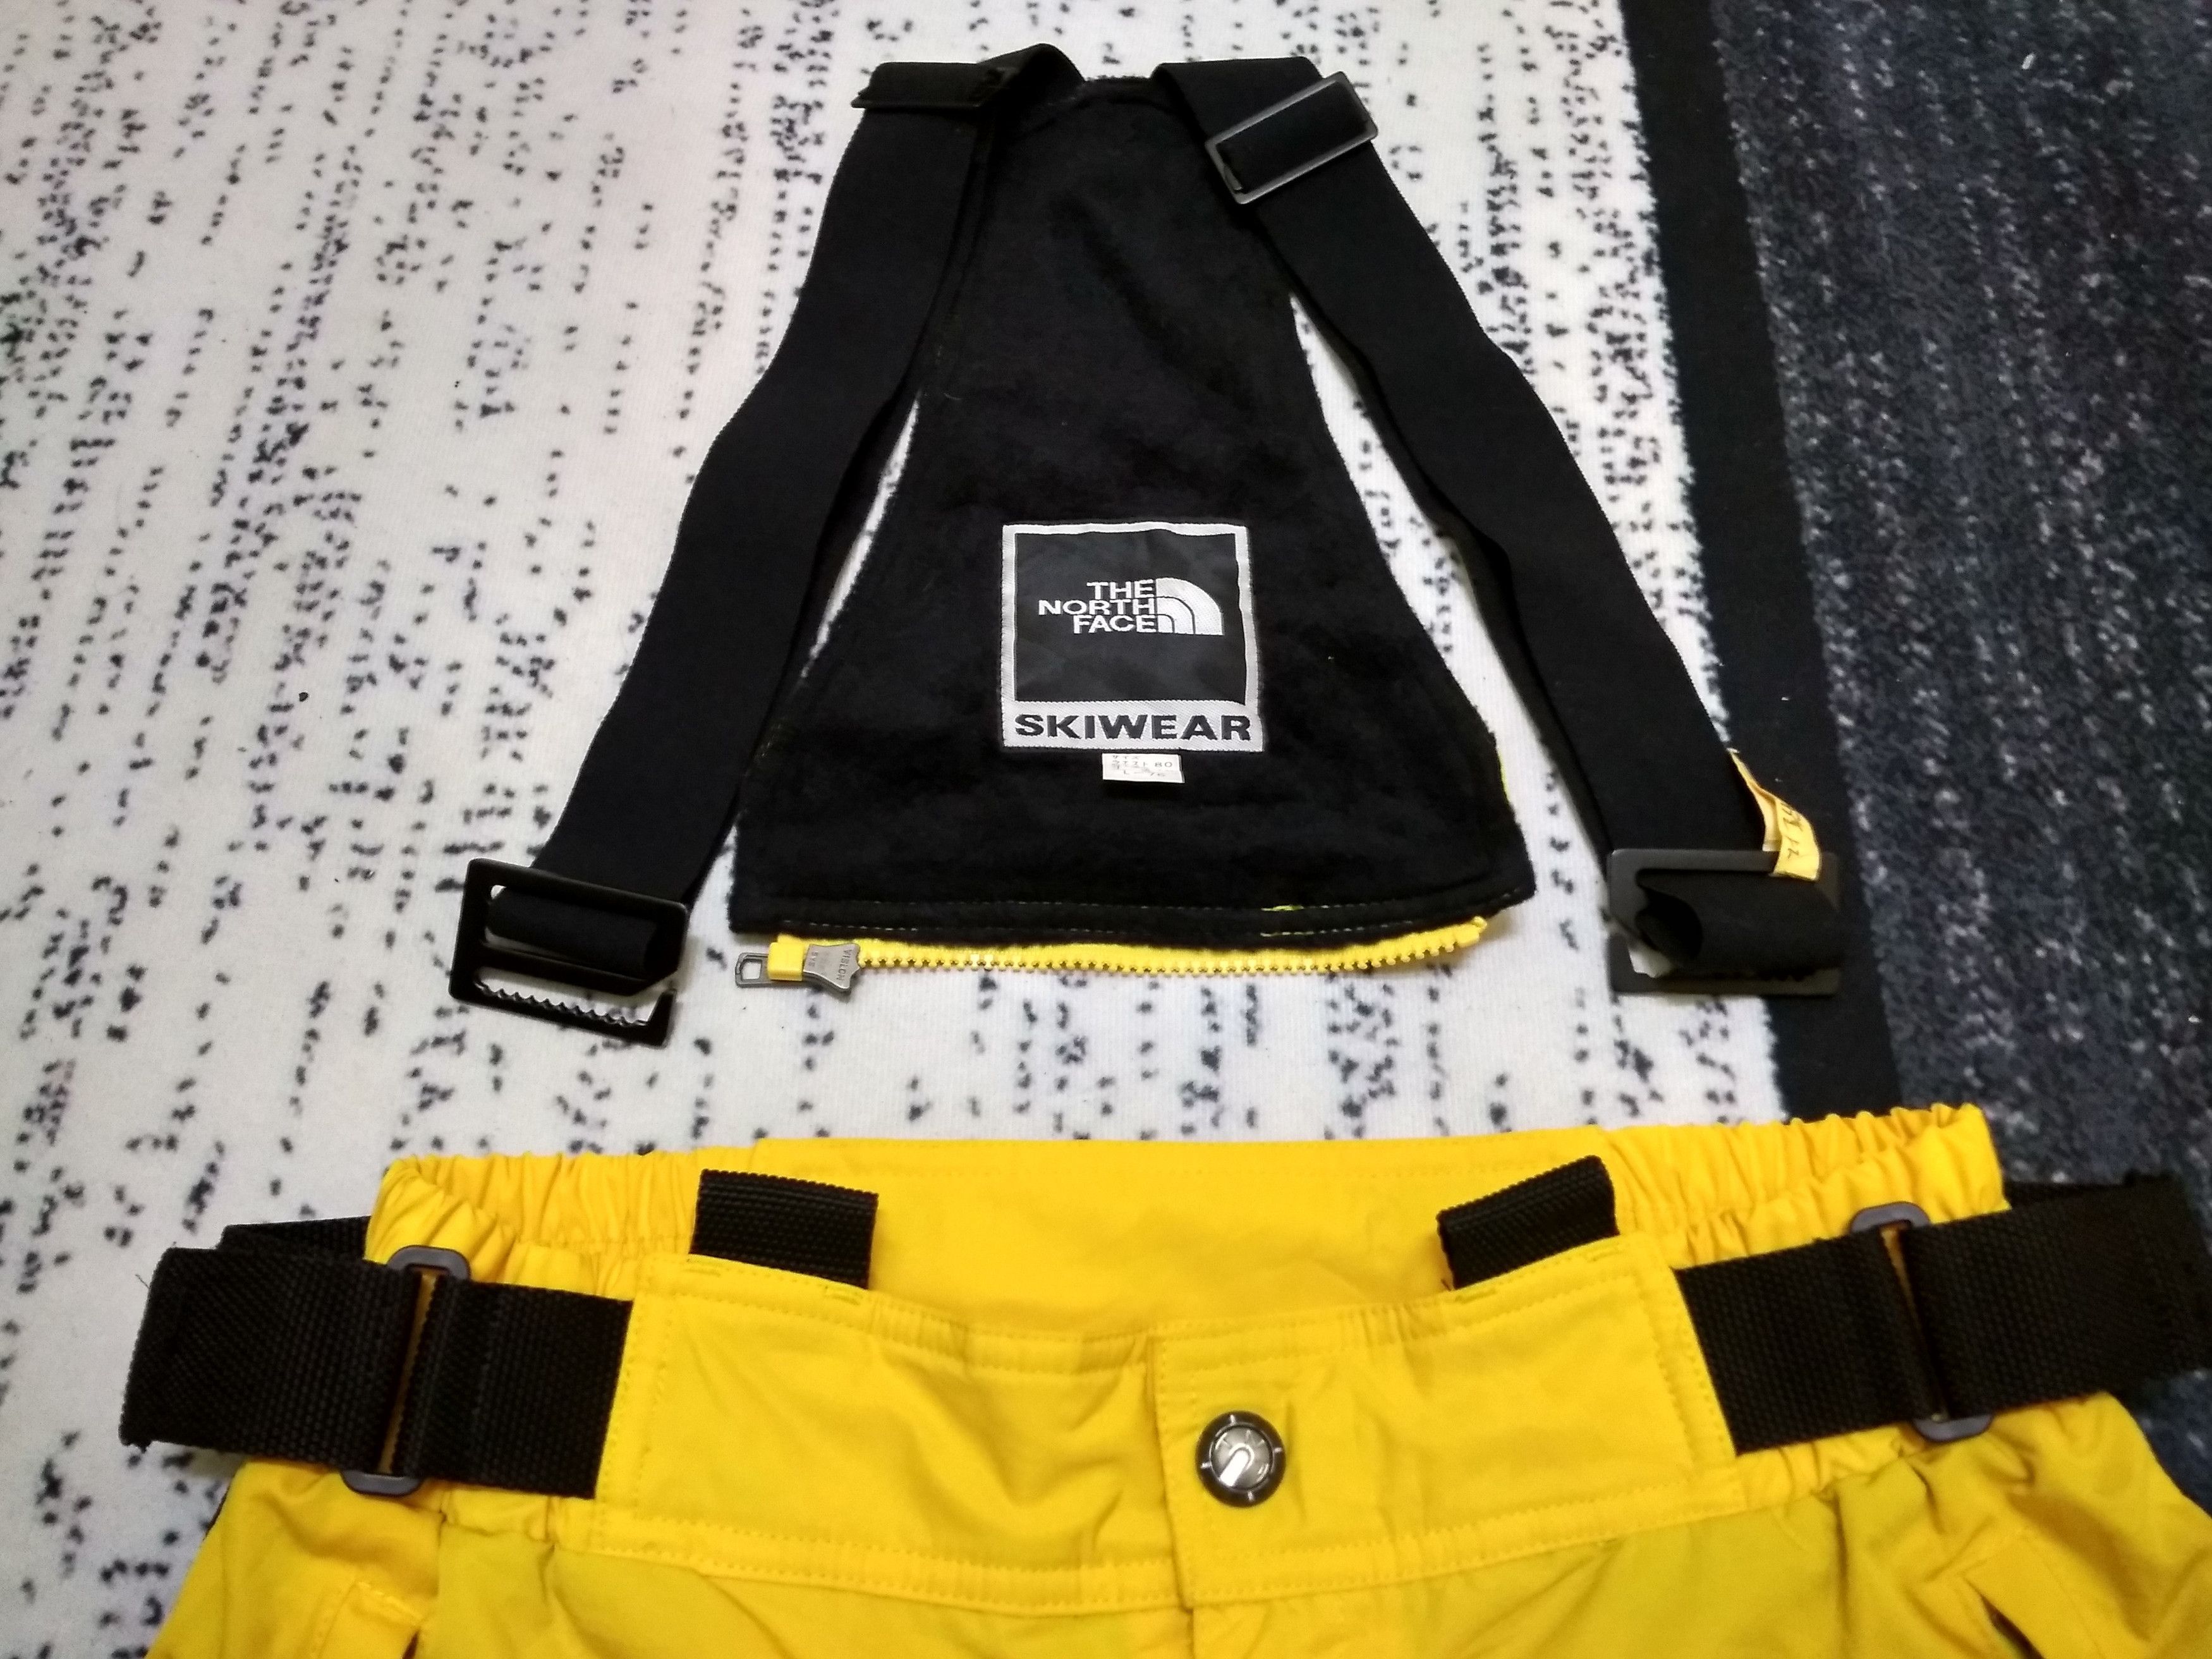 The North Face The North Face Overall Skiwear Size US 33 - 5 Thumbnail